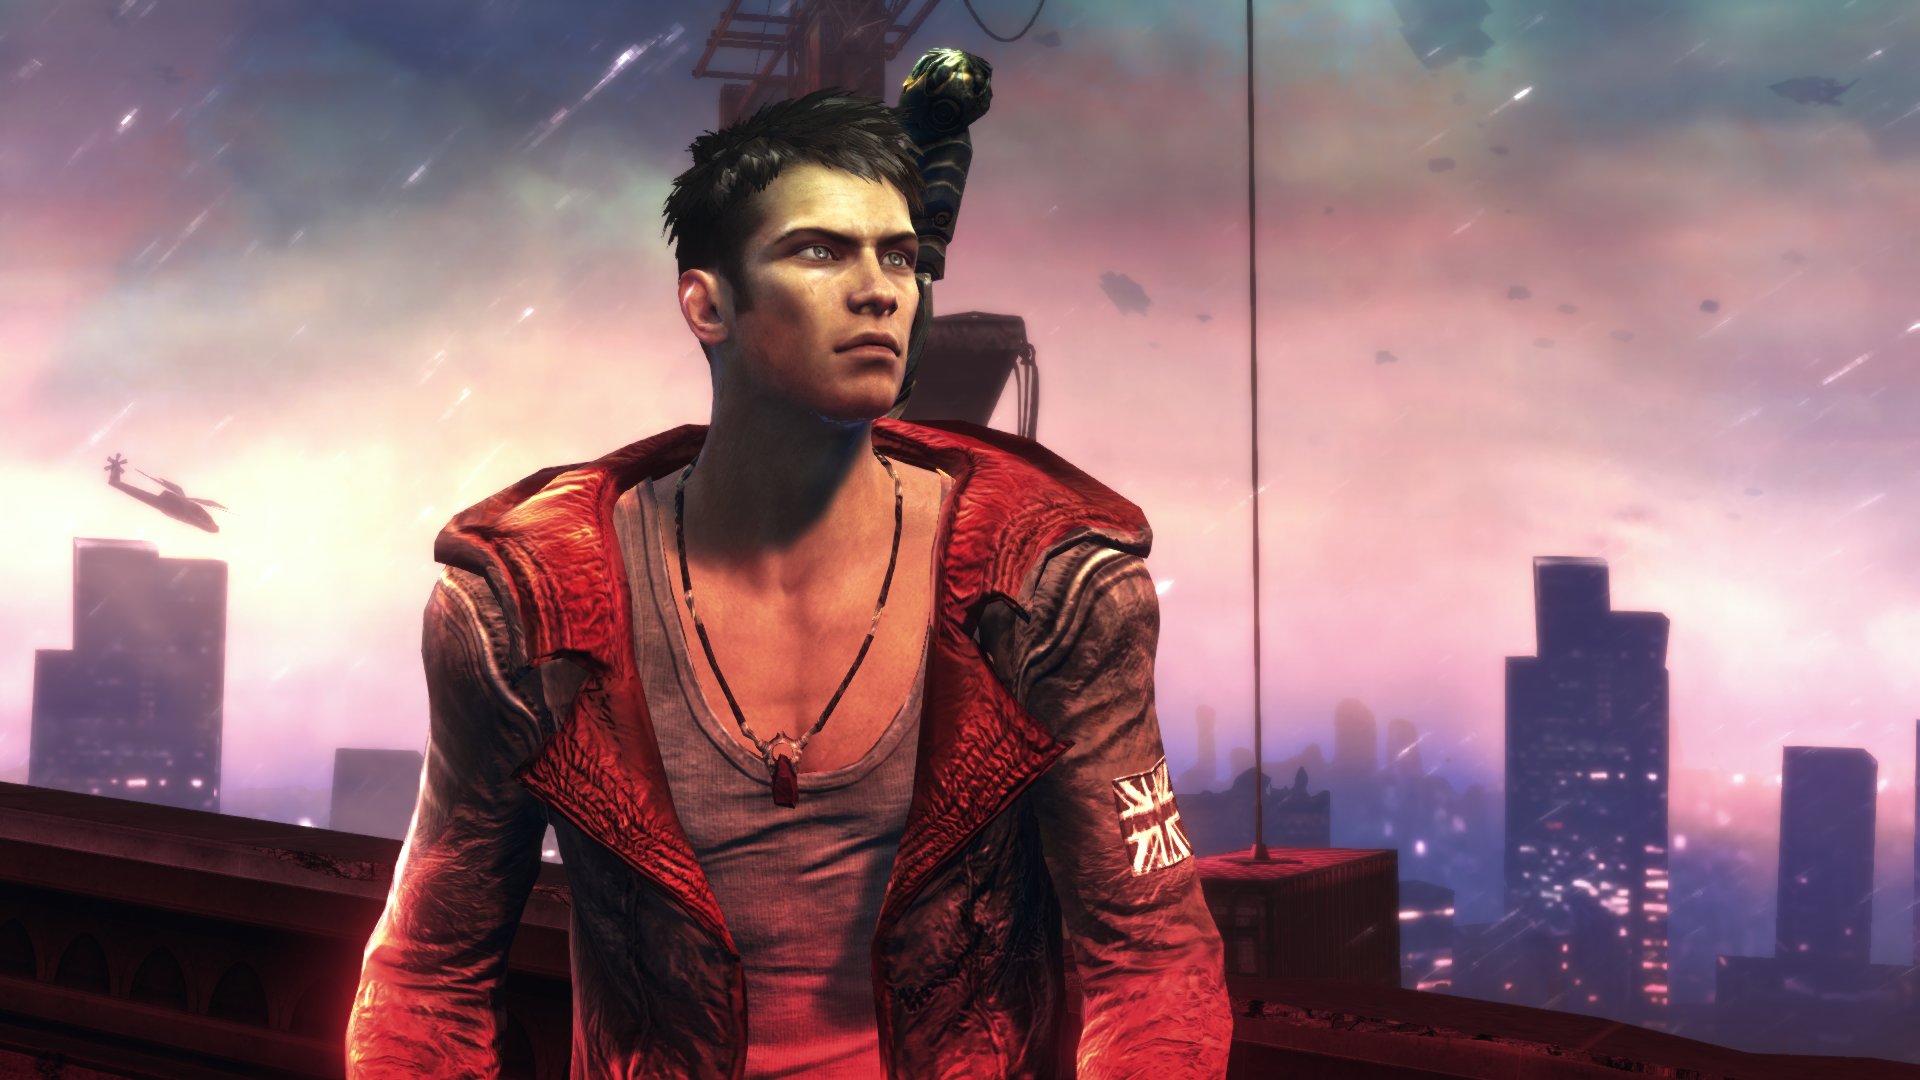 Review: DmC: Devil May Cry